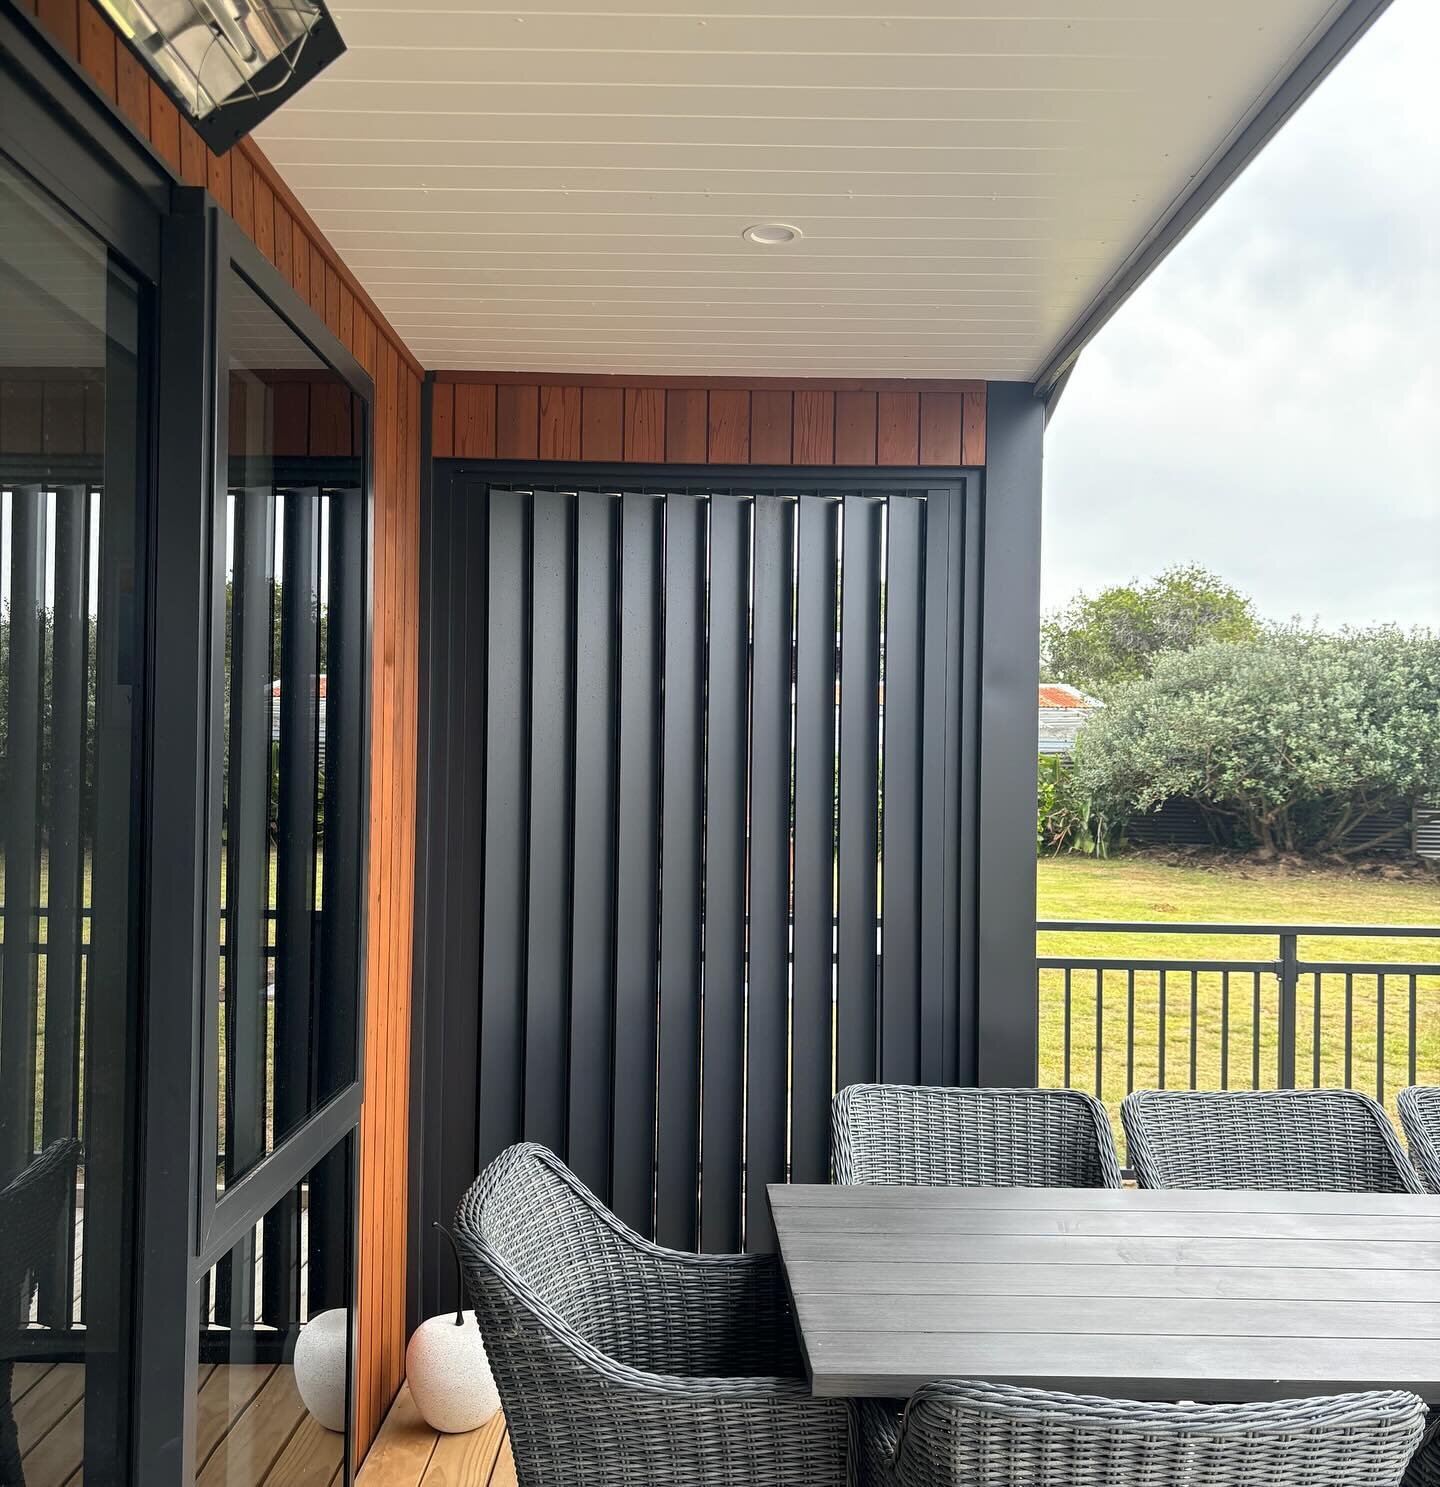 Recently installed Privacy Panel with operable 125mm RHS Vertical Blades

Our Privacy Screens &amp; Panels are commonly used to separate or enclose an area adding additional privacy, weather shielding and style. 

Wanting to add a little privacy to y